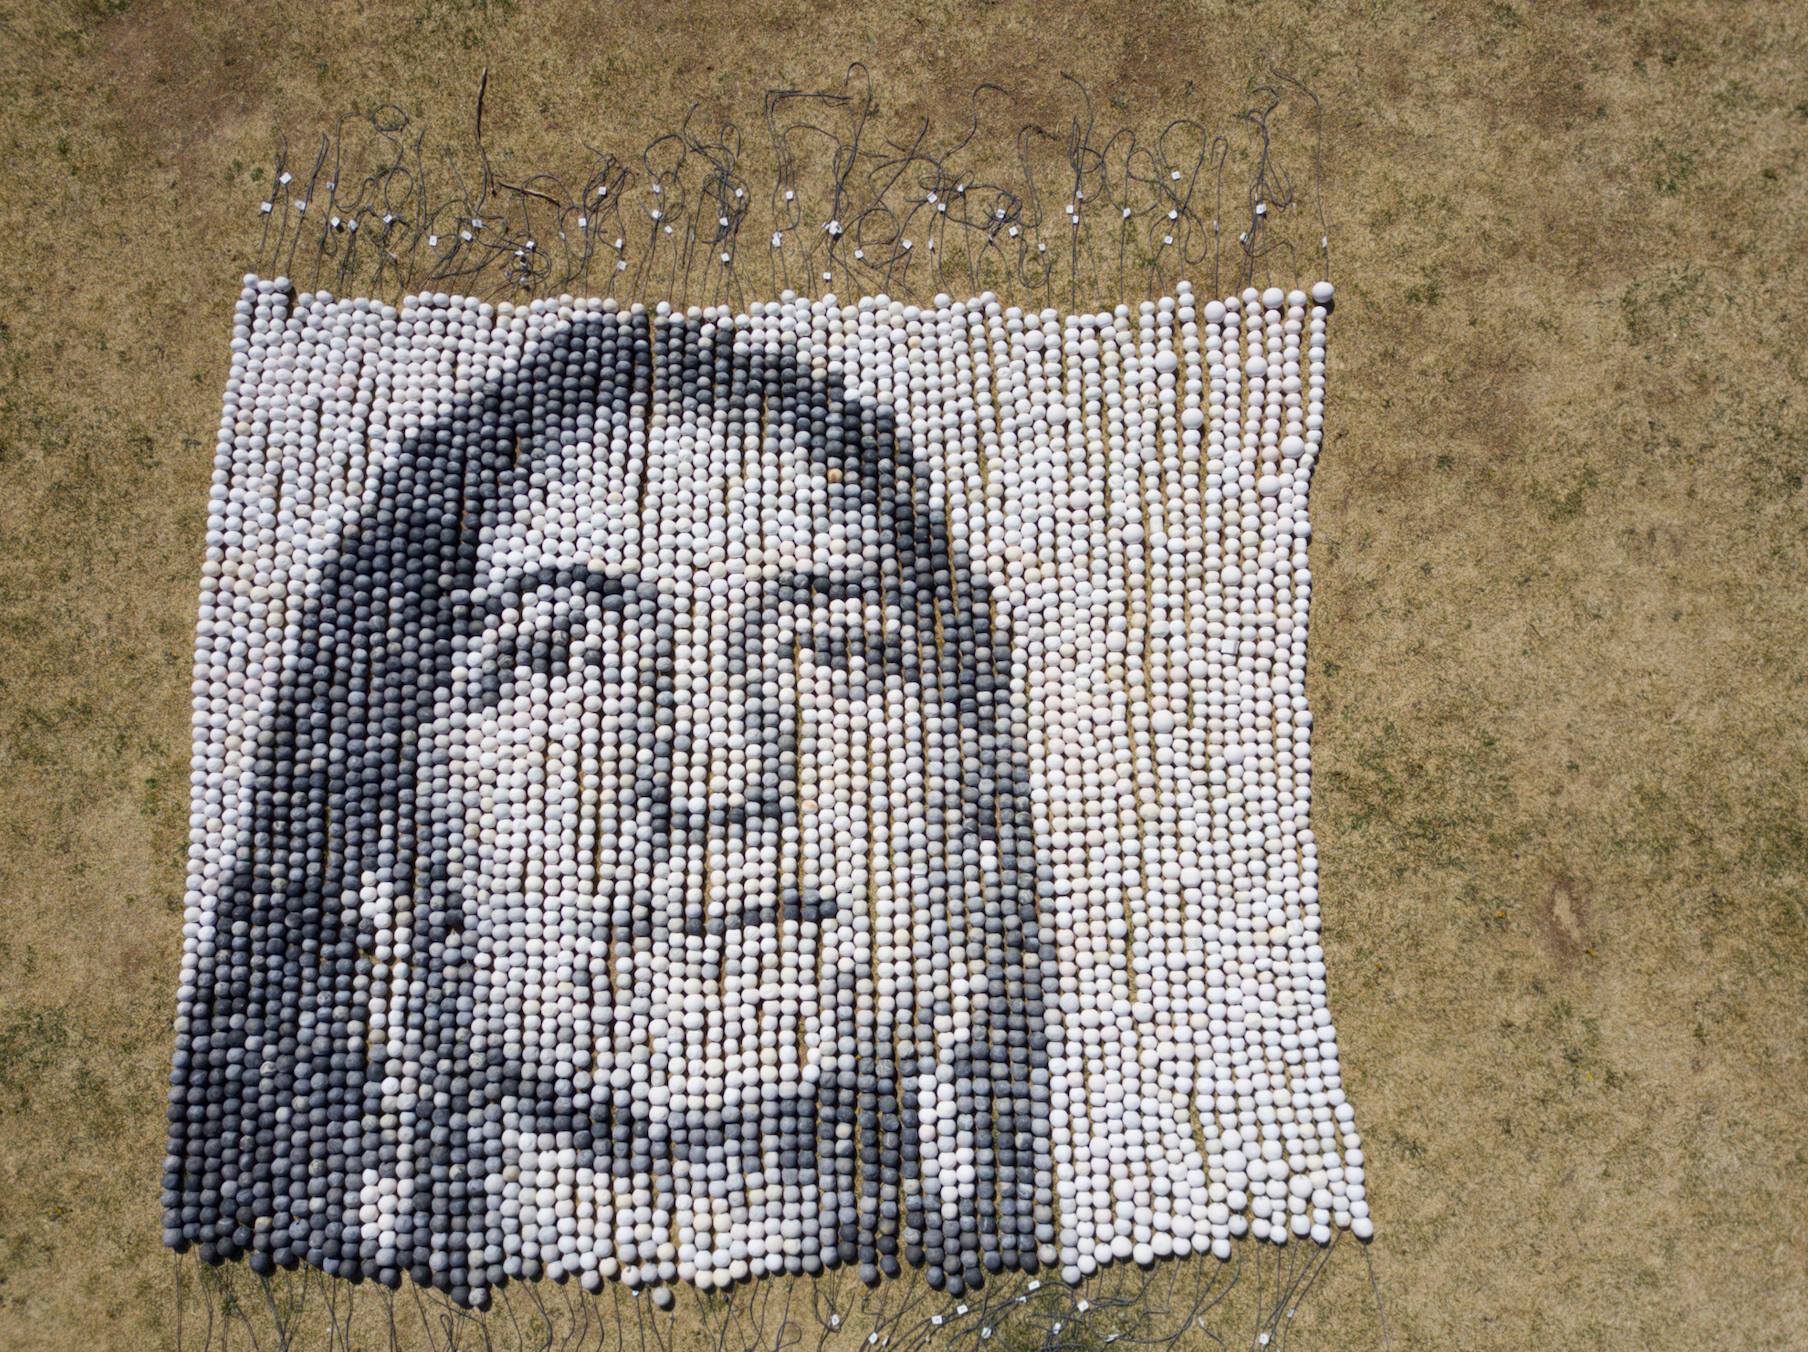 Composed of over 4000 individual handmade clay beads created by hundreds of communities across the so called U.S. and Canada, ‘Every One’ re-humanizes the data of missing and murdered Indigenous women, girls, queer and trans community members.